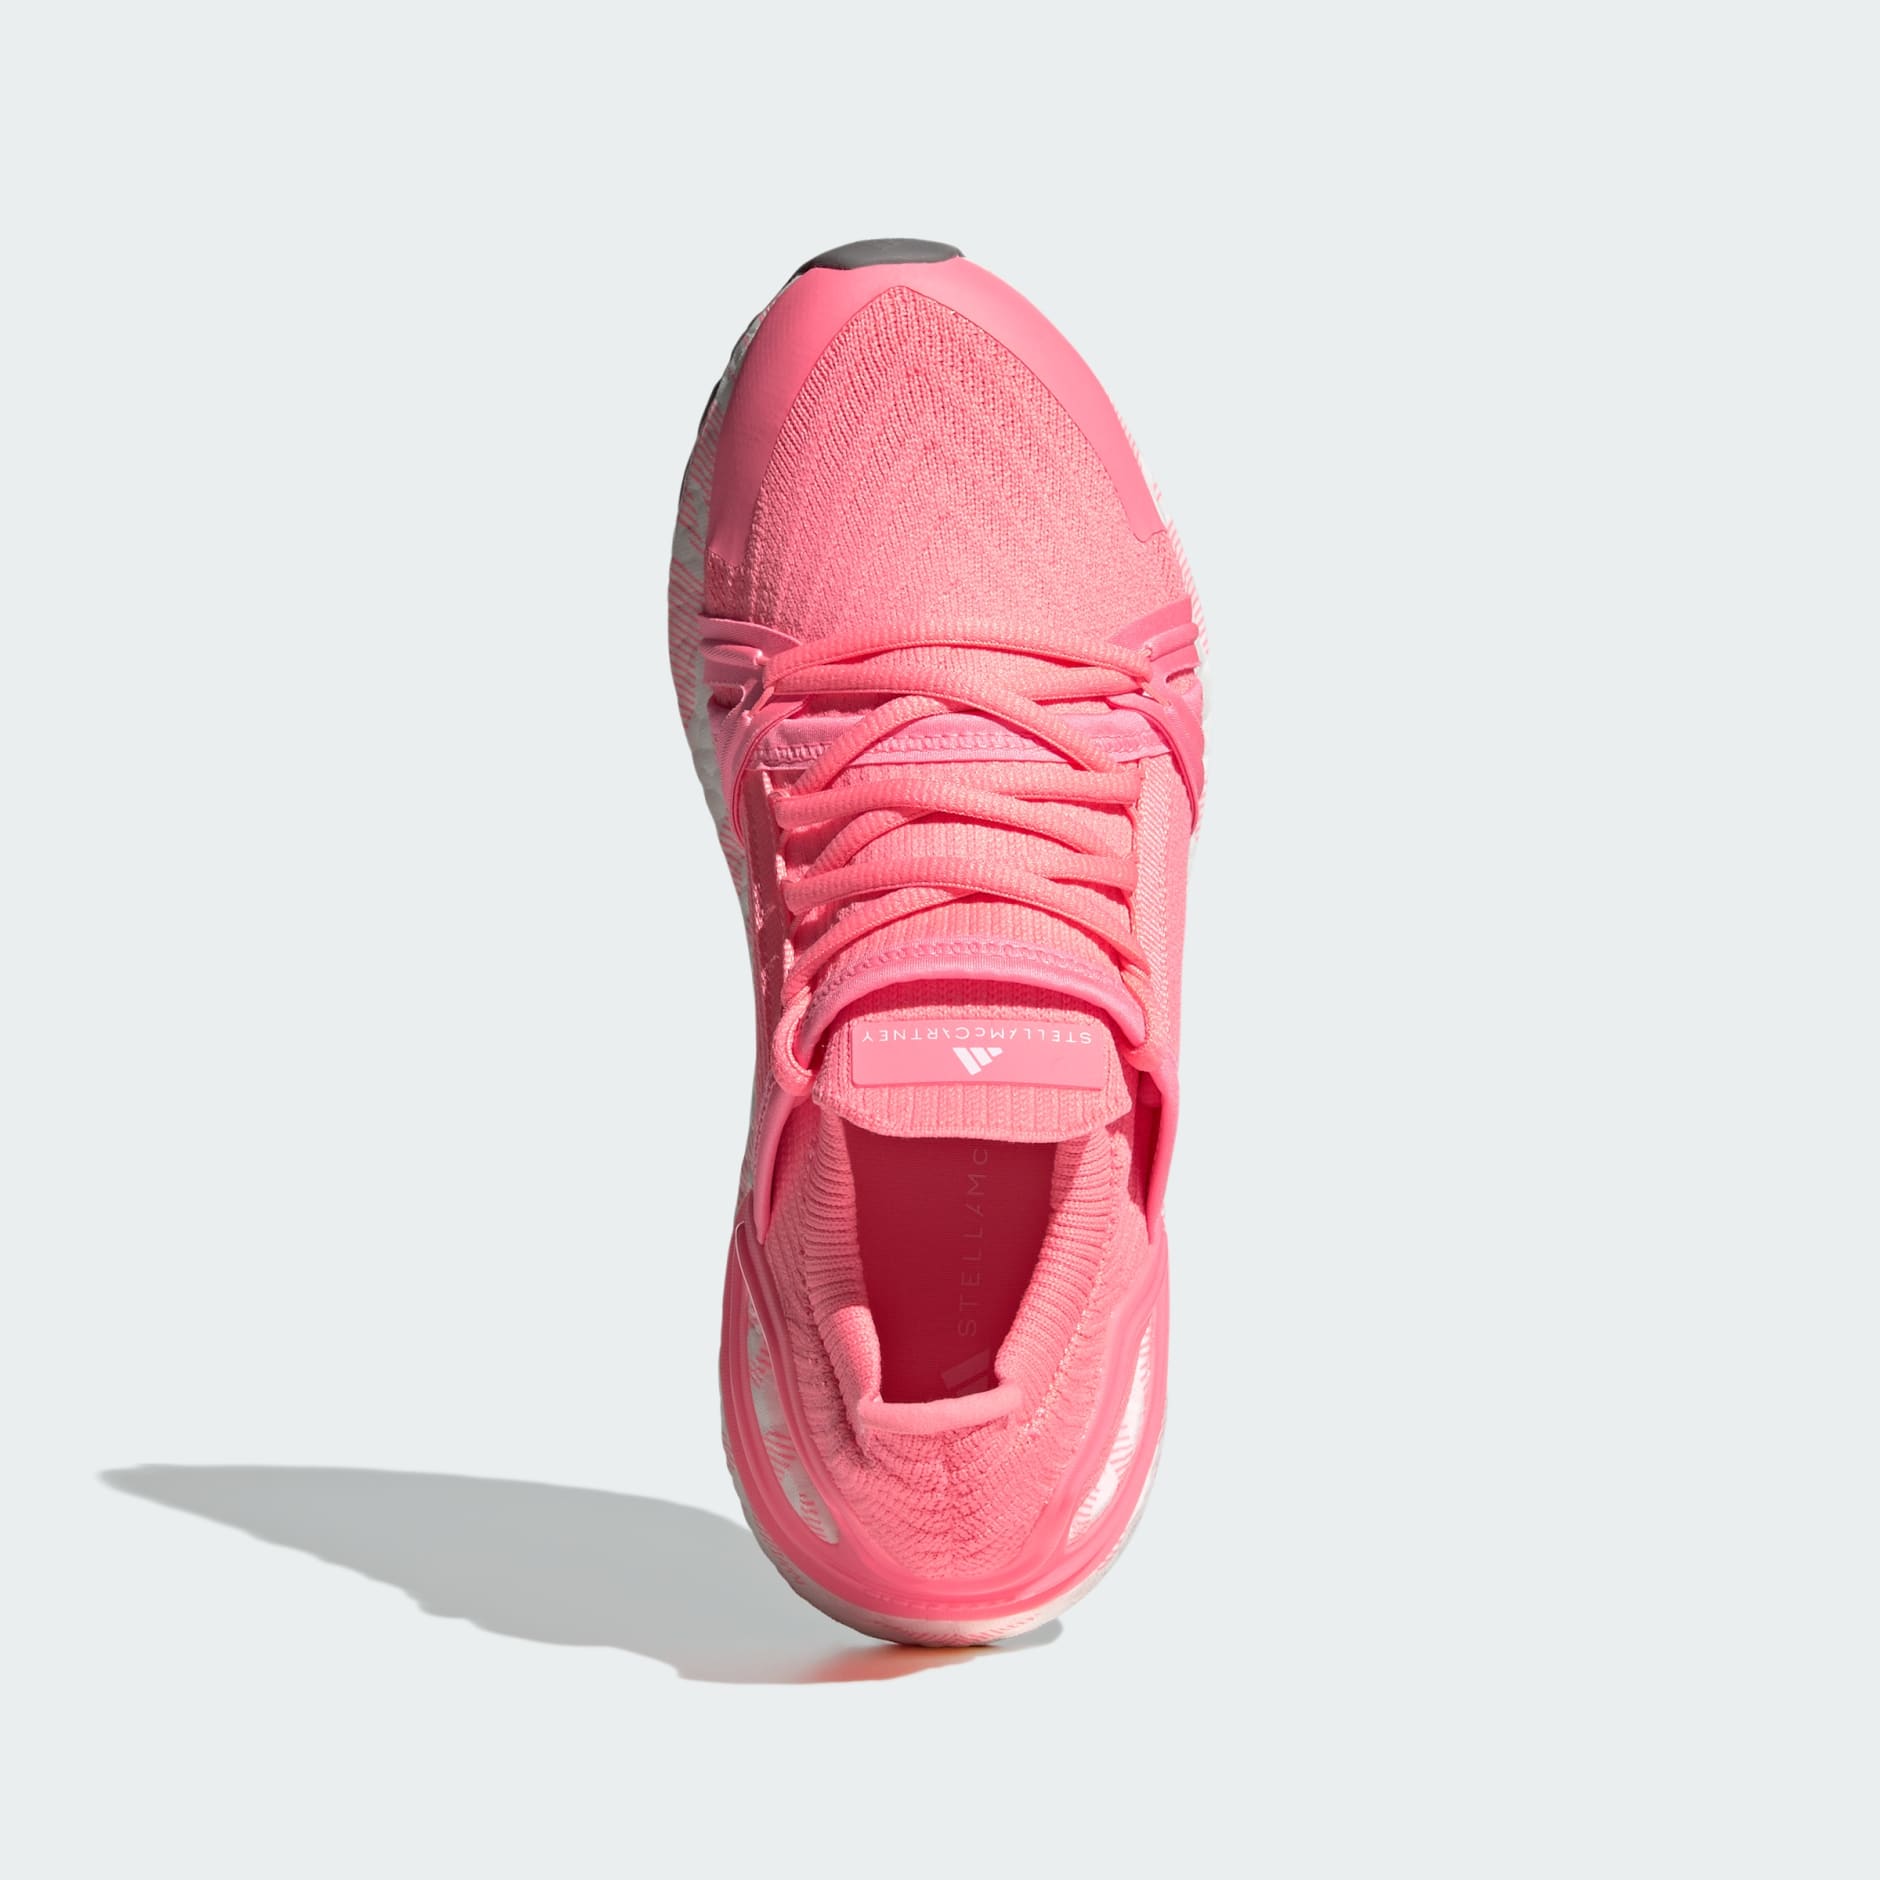 Women's Shoes - adidas by Stella McCartney Ultraboost 20 Shoes - Pink